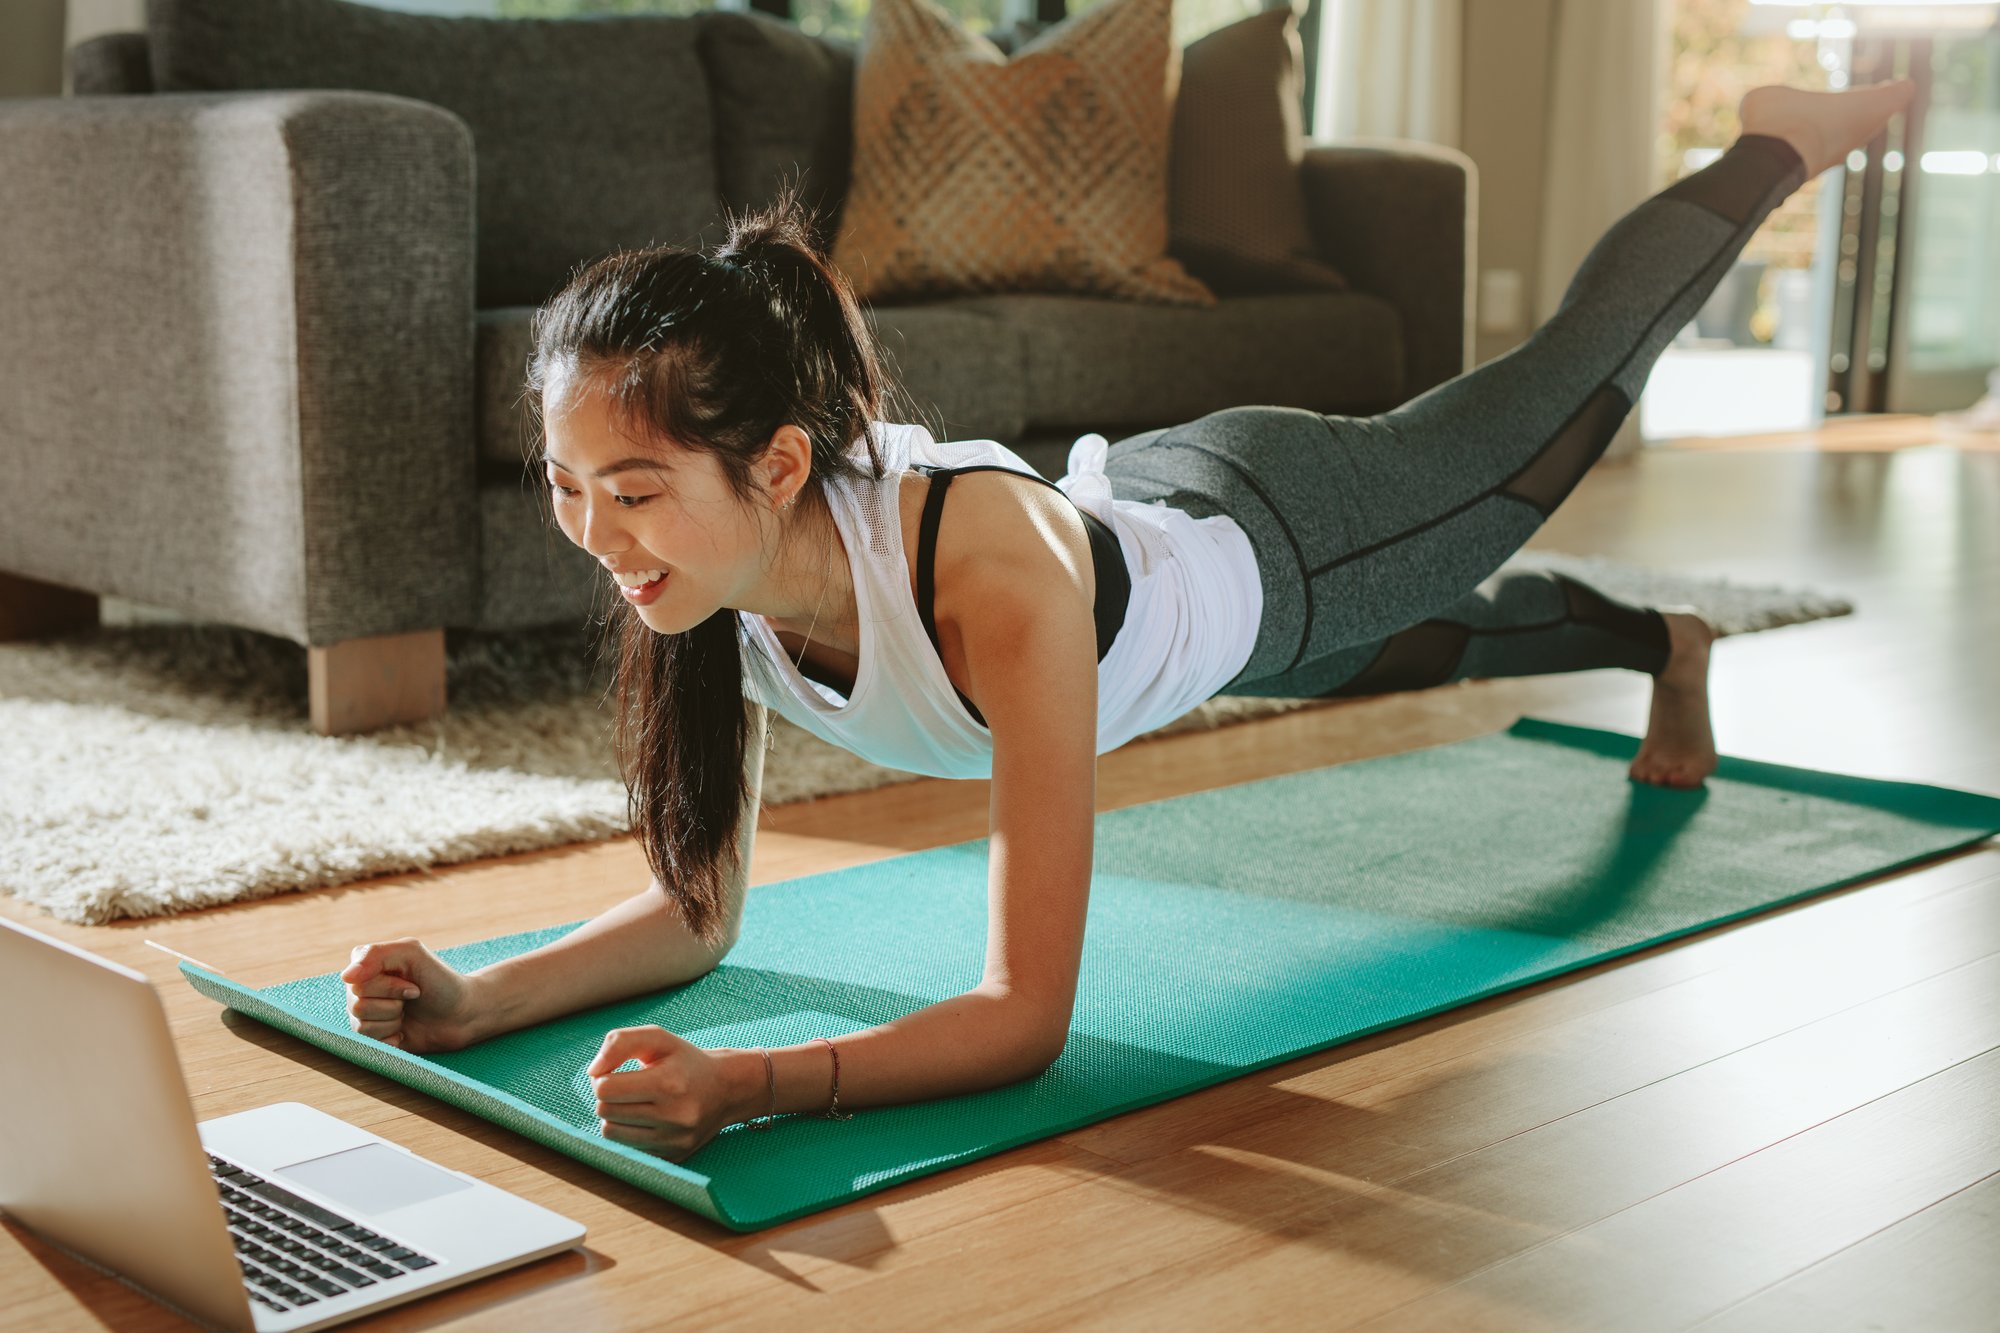 Woman in her living room doing an online workout on her laptop and using exercise as a lifestyle intervention to combat chronic pain from her endometriosis.